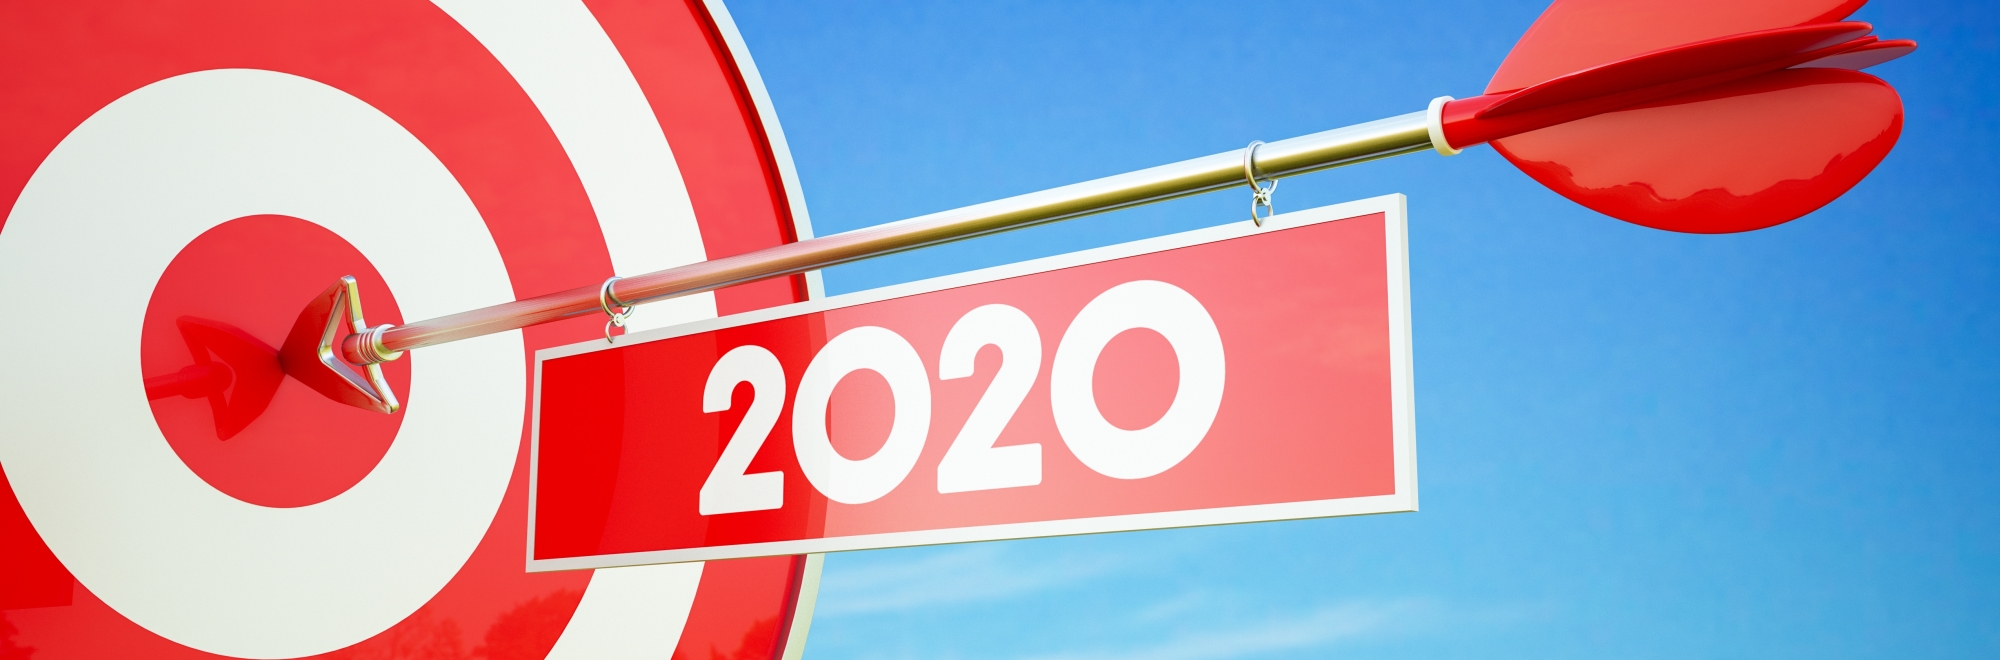 2020 Vision – A 10 point manifesto for the evolution of PR by Pete Mountstevens, chief creative officer at Taylor Herring